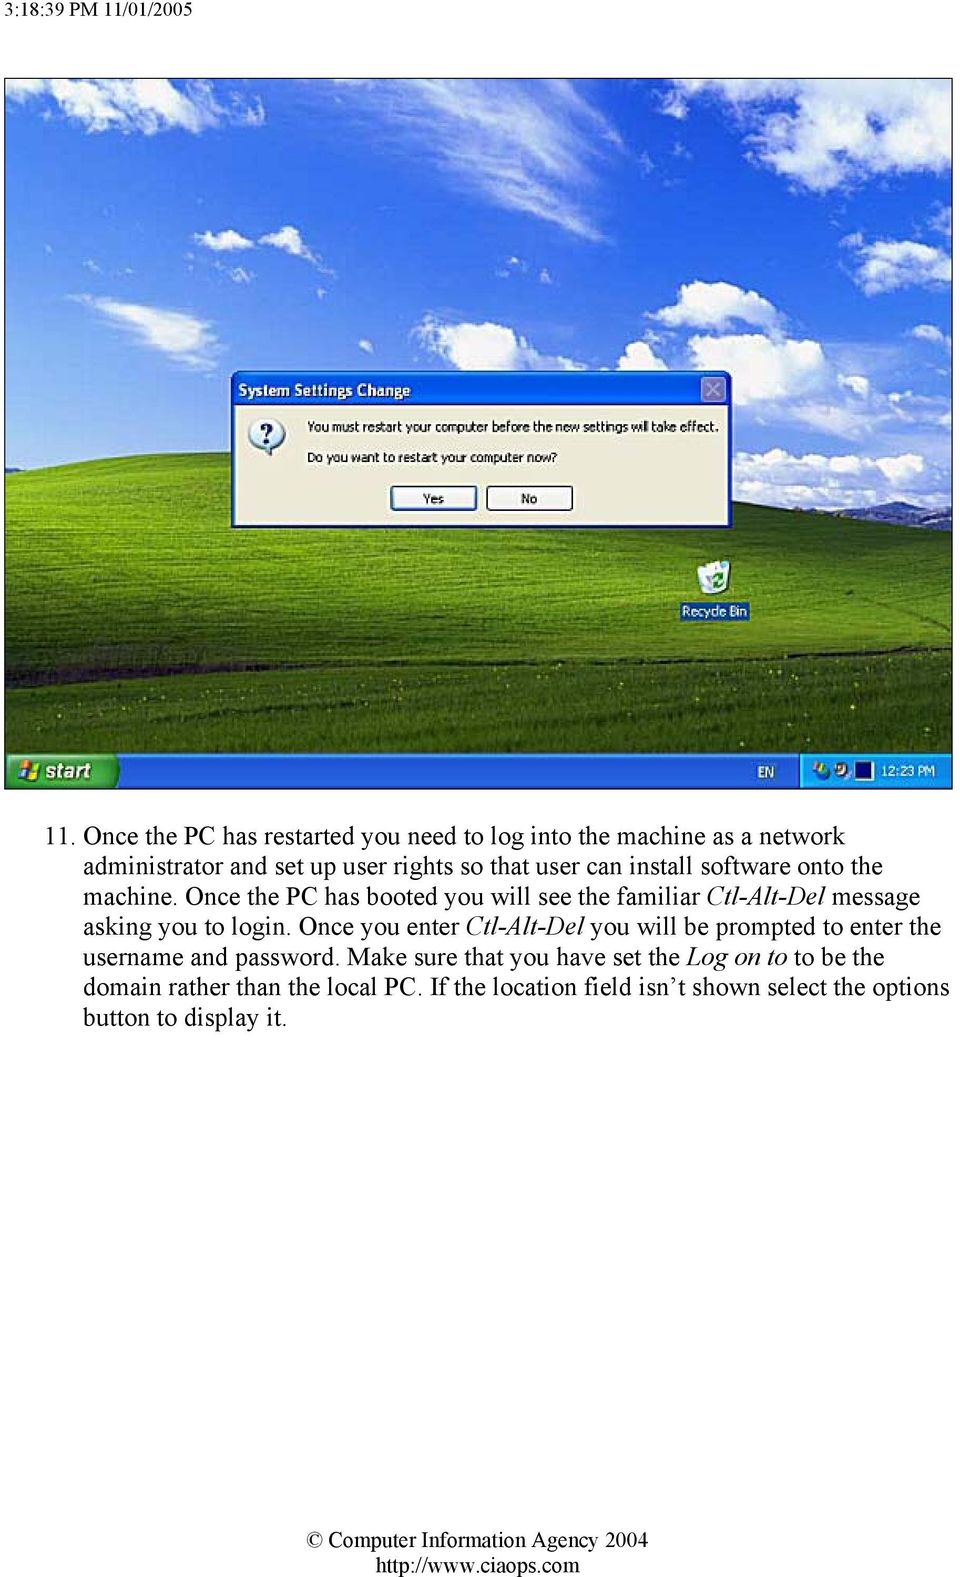 Once the PC has booted you will see the familiar Ctl-Alt-Del message asking you to login.